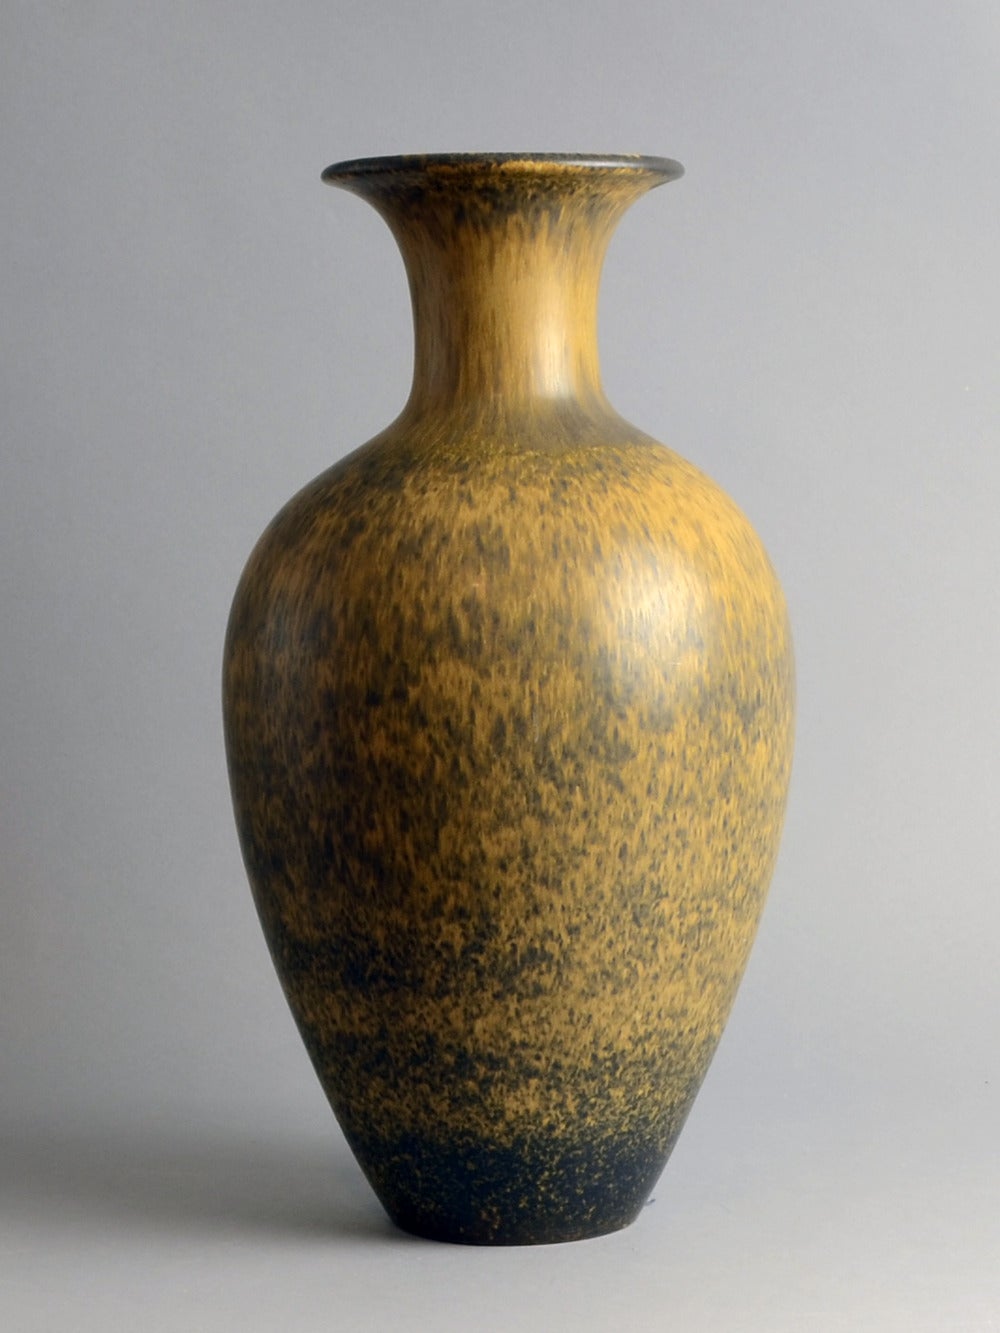 Stoneware vase with matte brown and yellow ochre glaze, circa 1950s-1960s. 
Incised "R (three crowns) Sweden GN AKT"